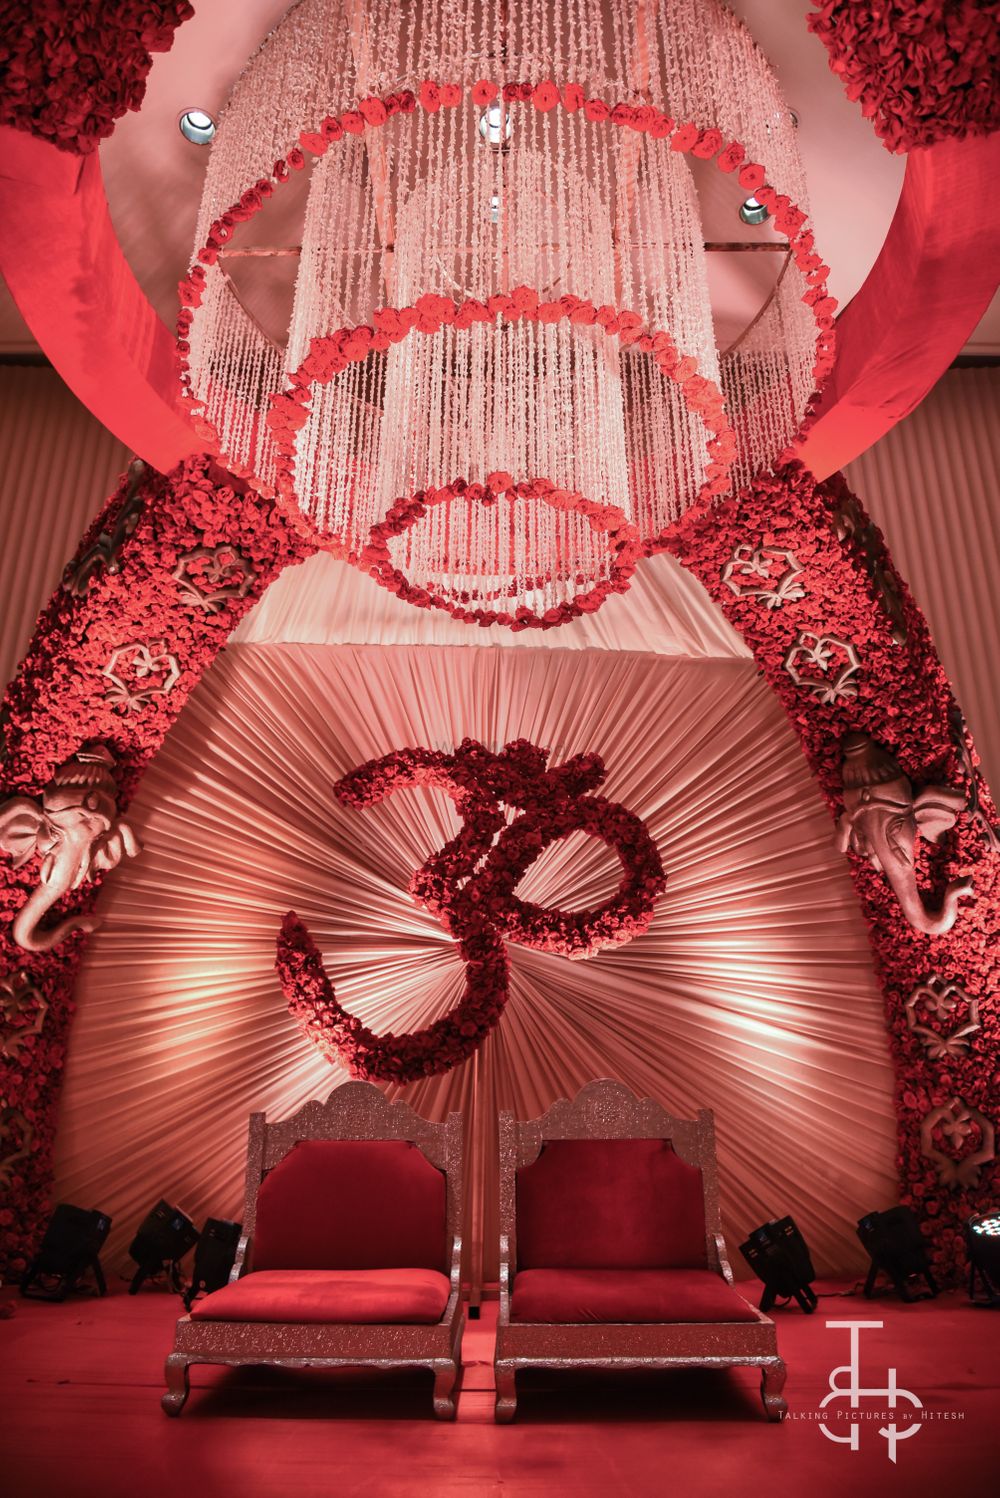 Photo of White and red floral chandelier in wedding decor